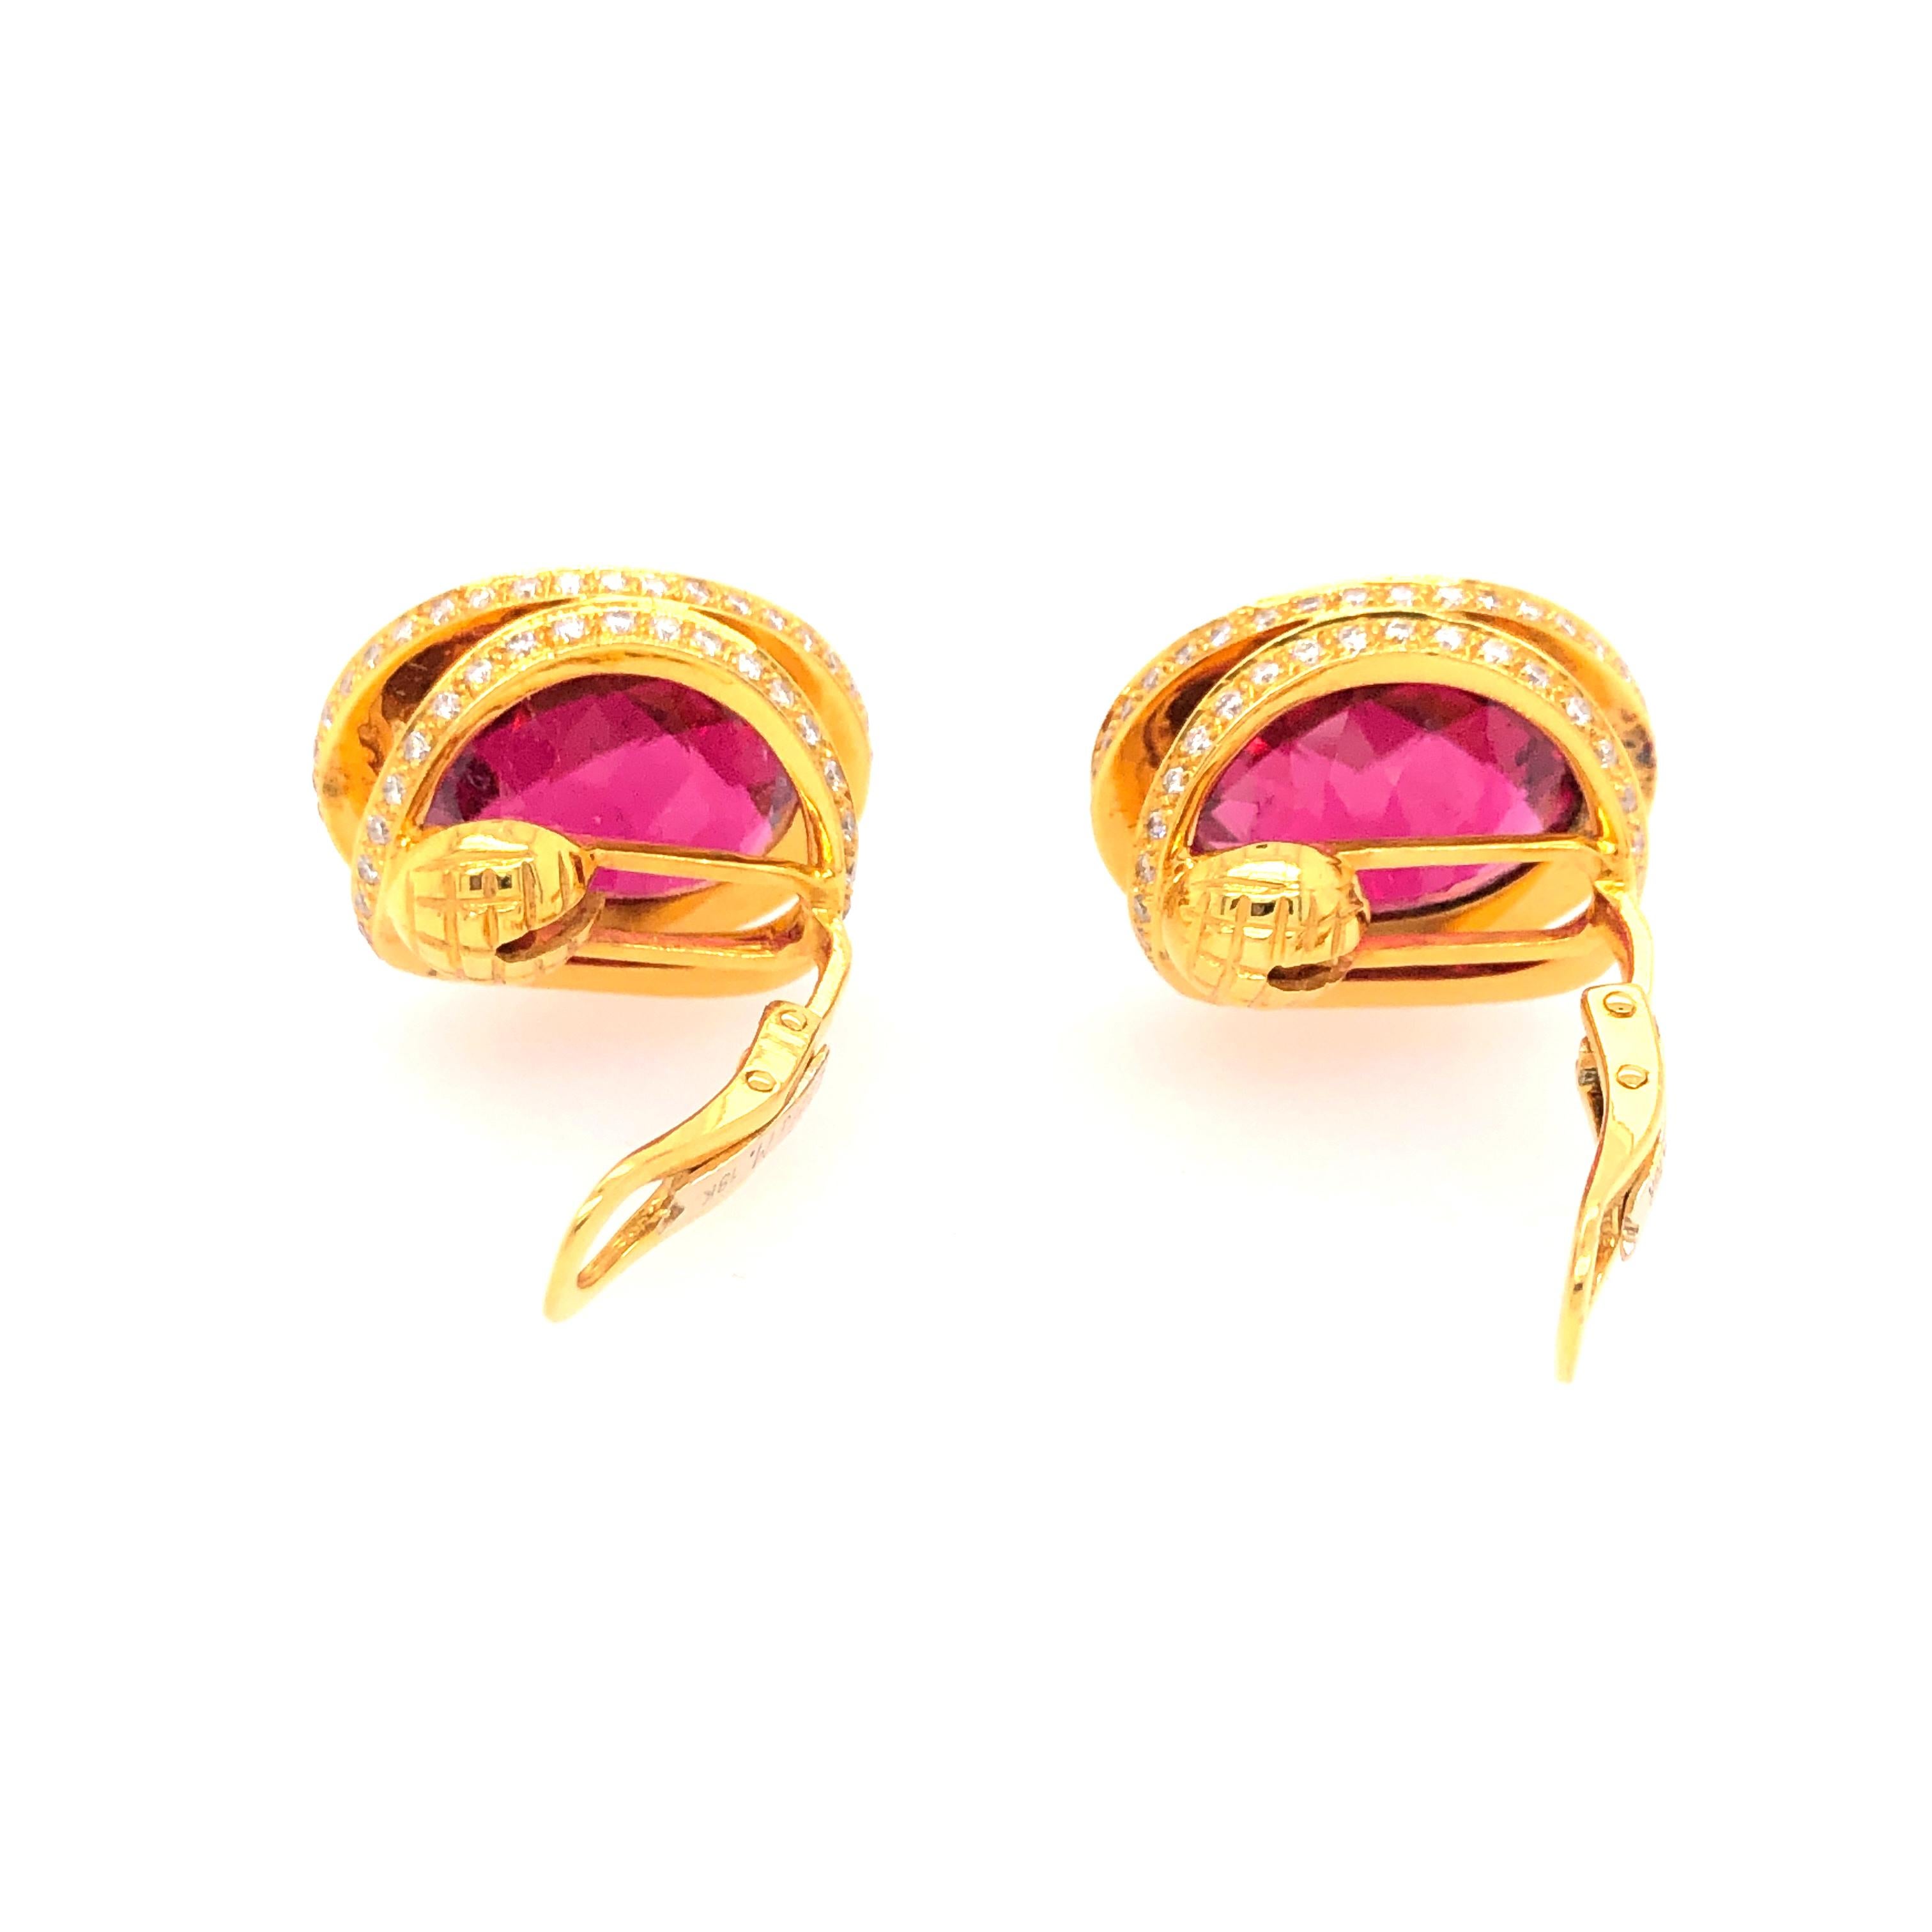 Contemporary Laura Munder Rubellite and Diamond Earrings